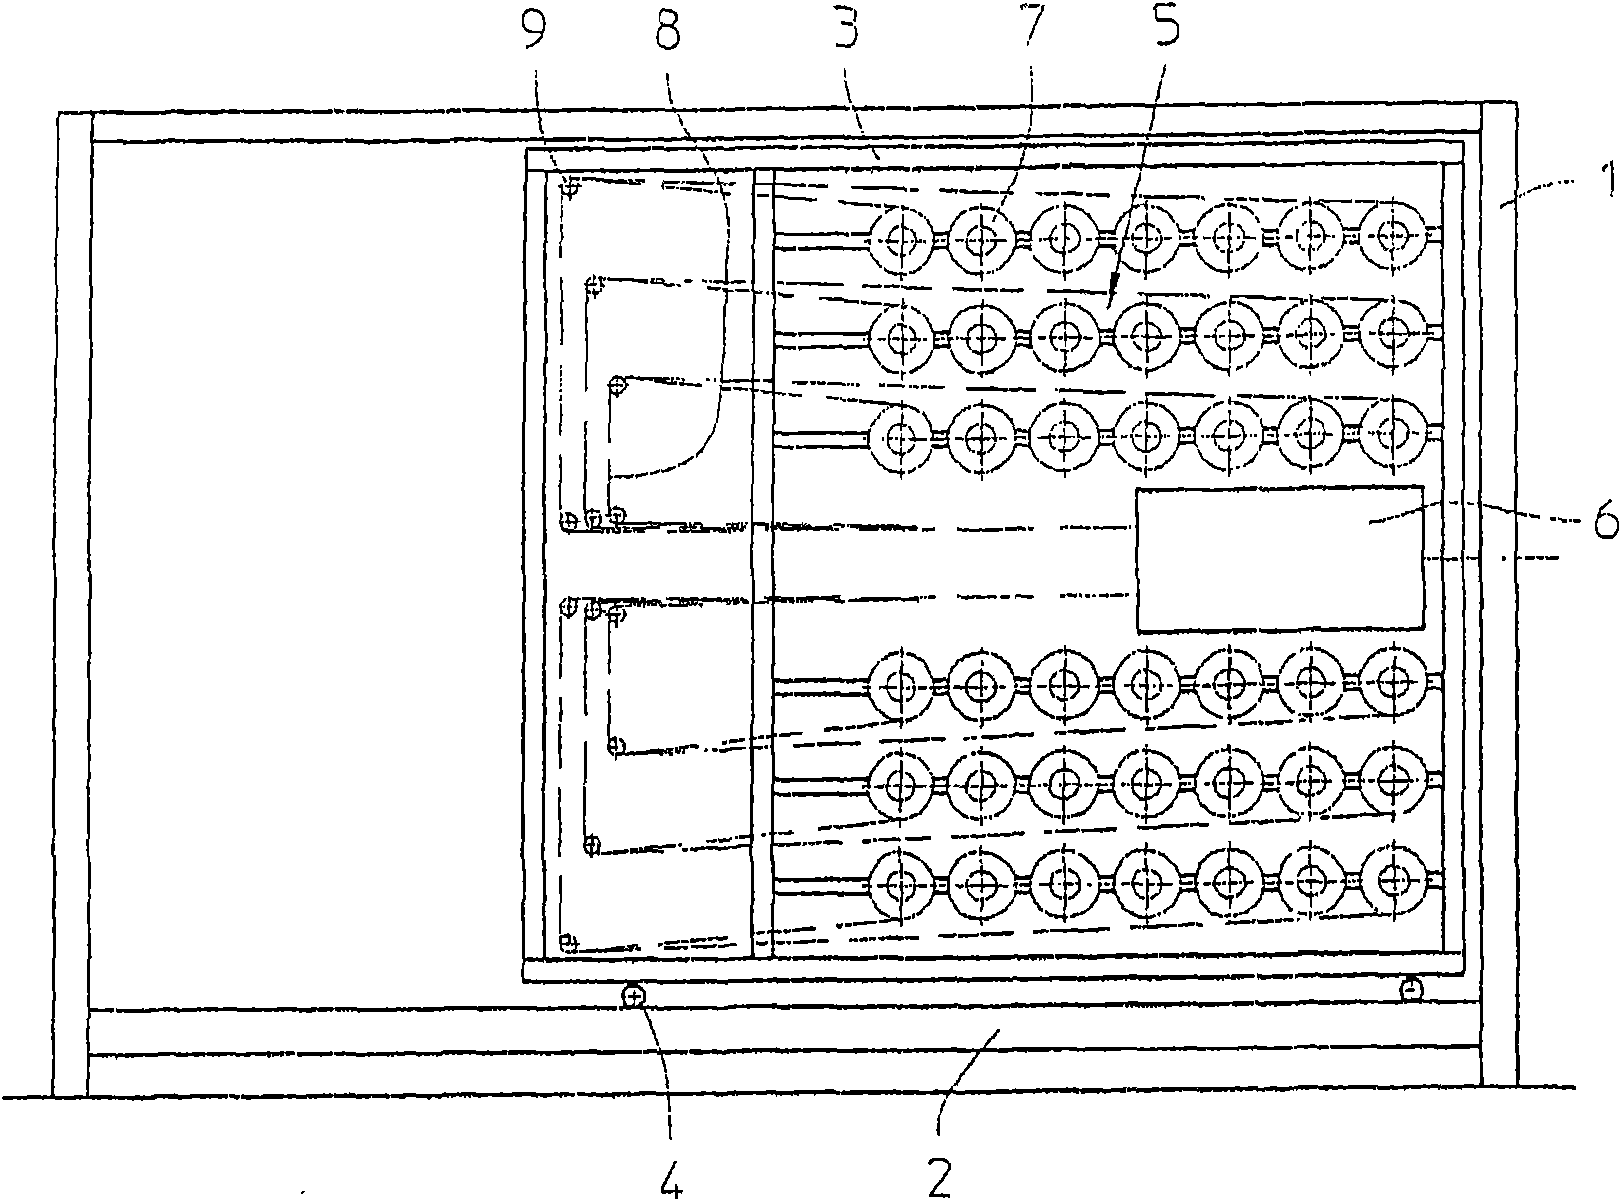 Method and device for creating a unidirectional fibre layer, method for manufacturing a multi-axial layed fabric and a multi-axial machine as well as a method for manufacturing a woven cloth and weavi